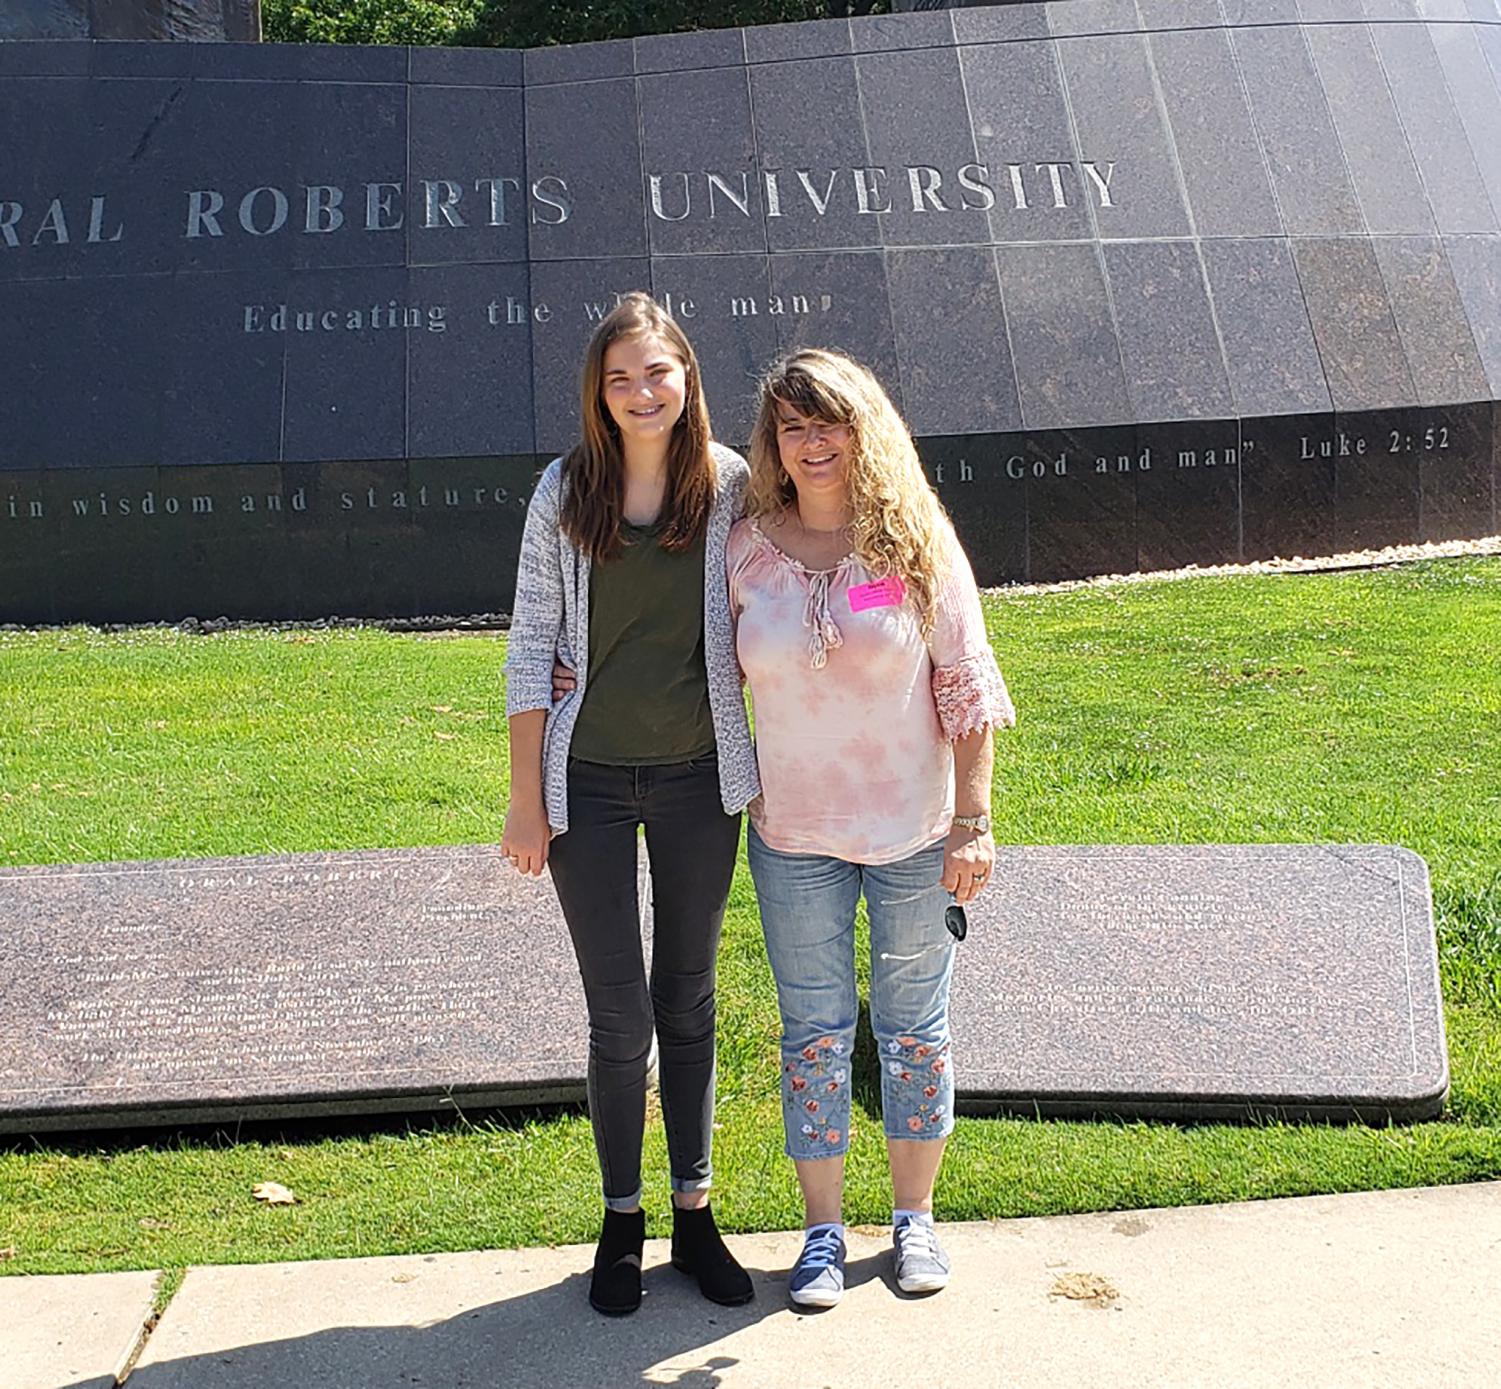 Barrington and her mother pose for a picture at Oral Roberts University. She plans to attend the university after graduating high school.